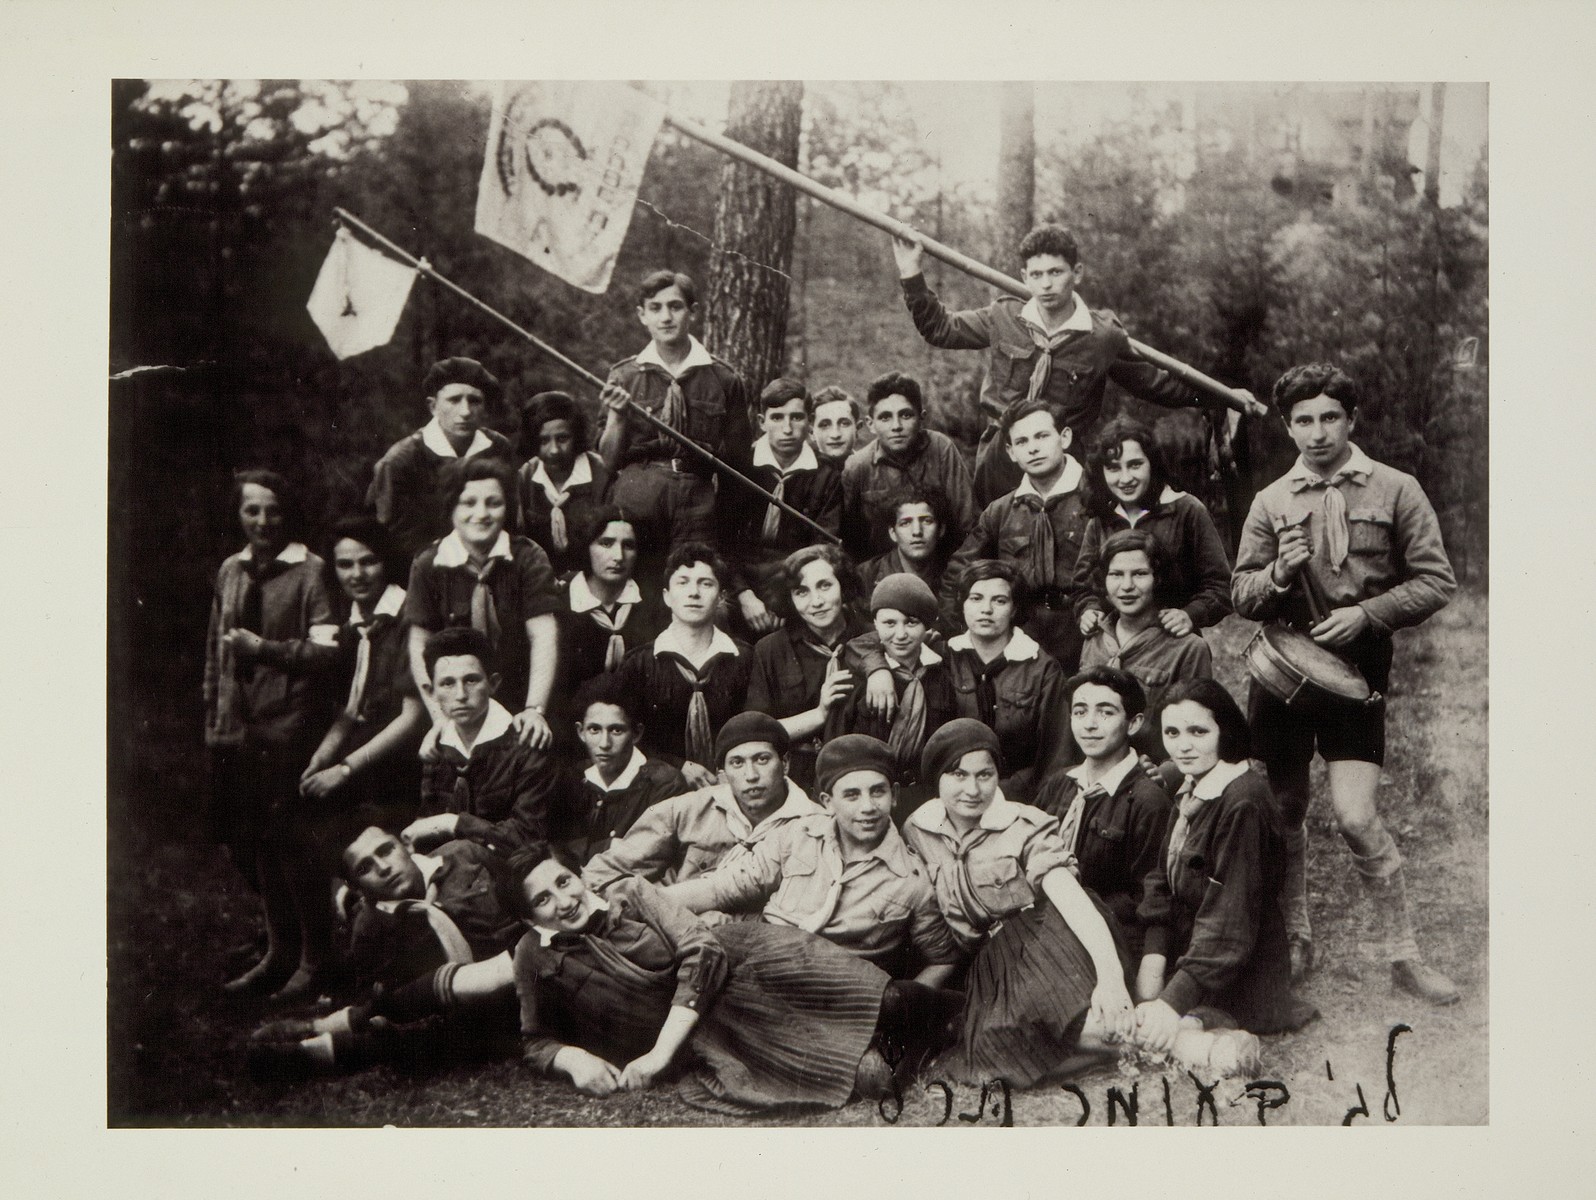 Members of Hashomer Hatzair from Eisiskes and Vilna celebrate Lag Ba'Omer on an outing in the woods. 

Dov Wilenski, is standing in the top row holding a flag.  He later immigrated to Palestine.  Pictured in the center of the second row, wearing a beret, is Resia (nee Gurwicz) Alpert,  from Vilna.  She immigrated to Palestine (Kibbutz Amir) in 1939.